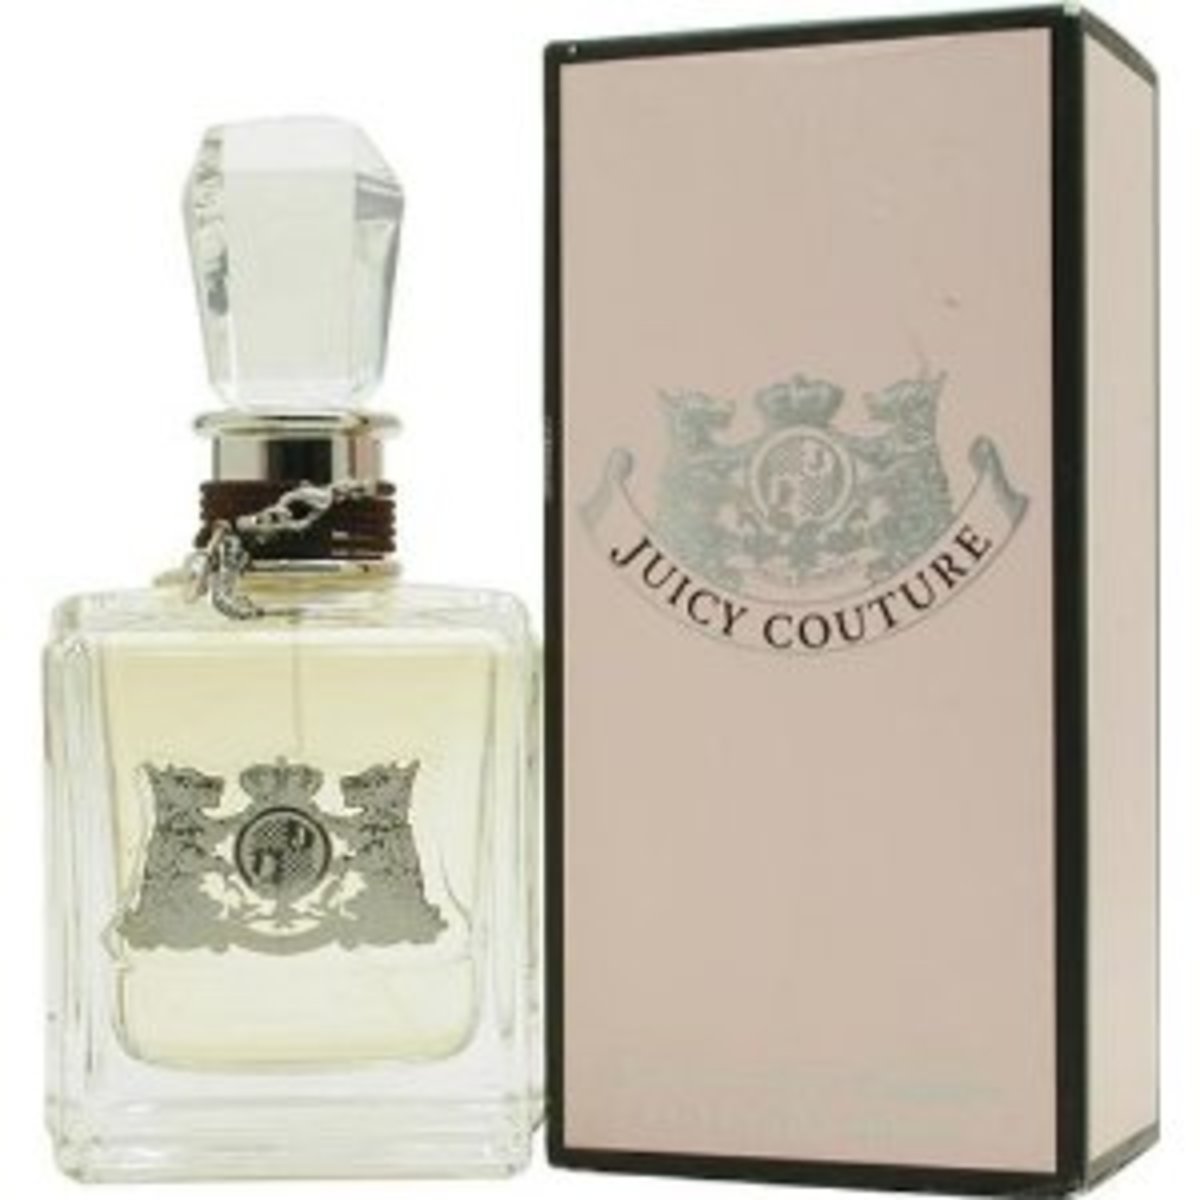 One of the top perfumes for women - Juicy Couture